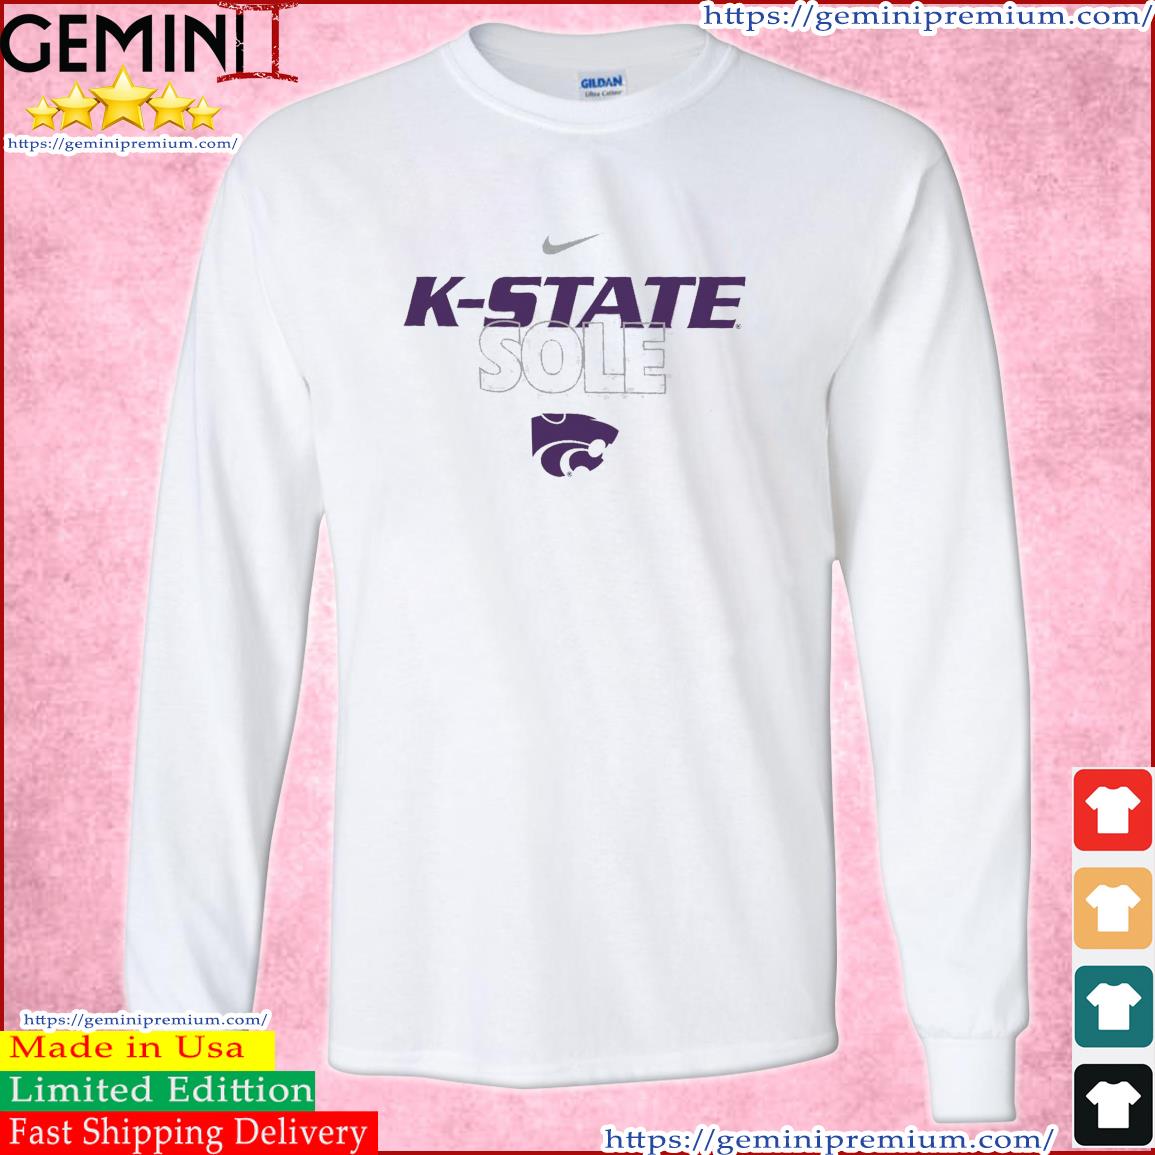 Kansas State Wildcats Men's K-State Sole s Long Sleeve Tee